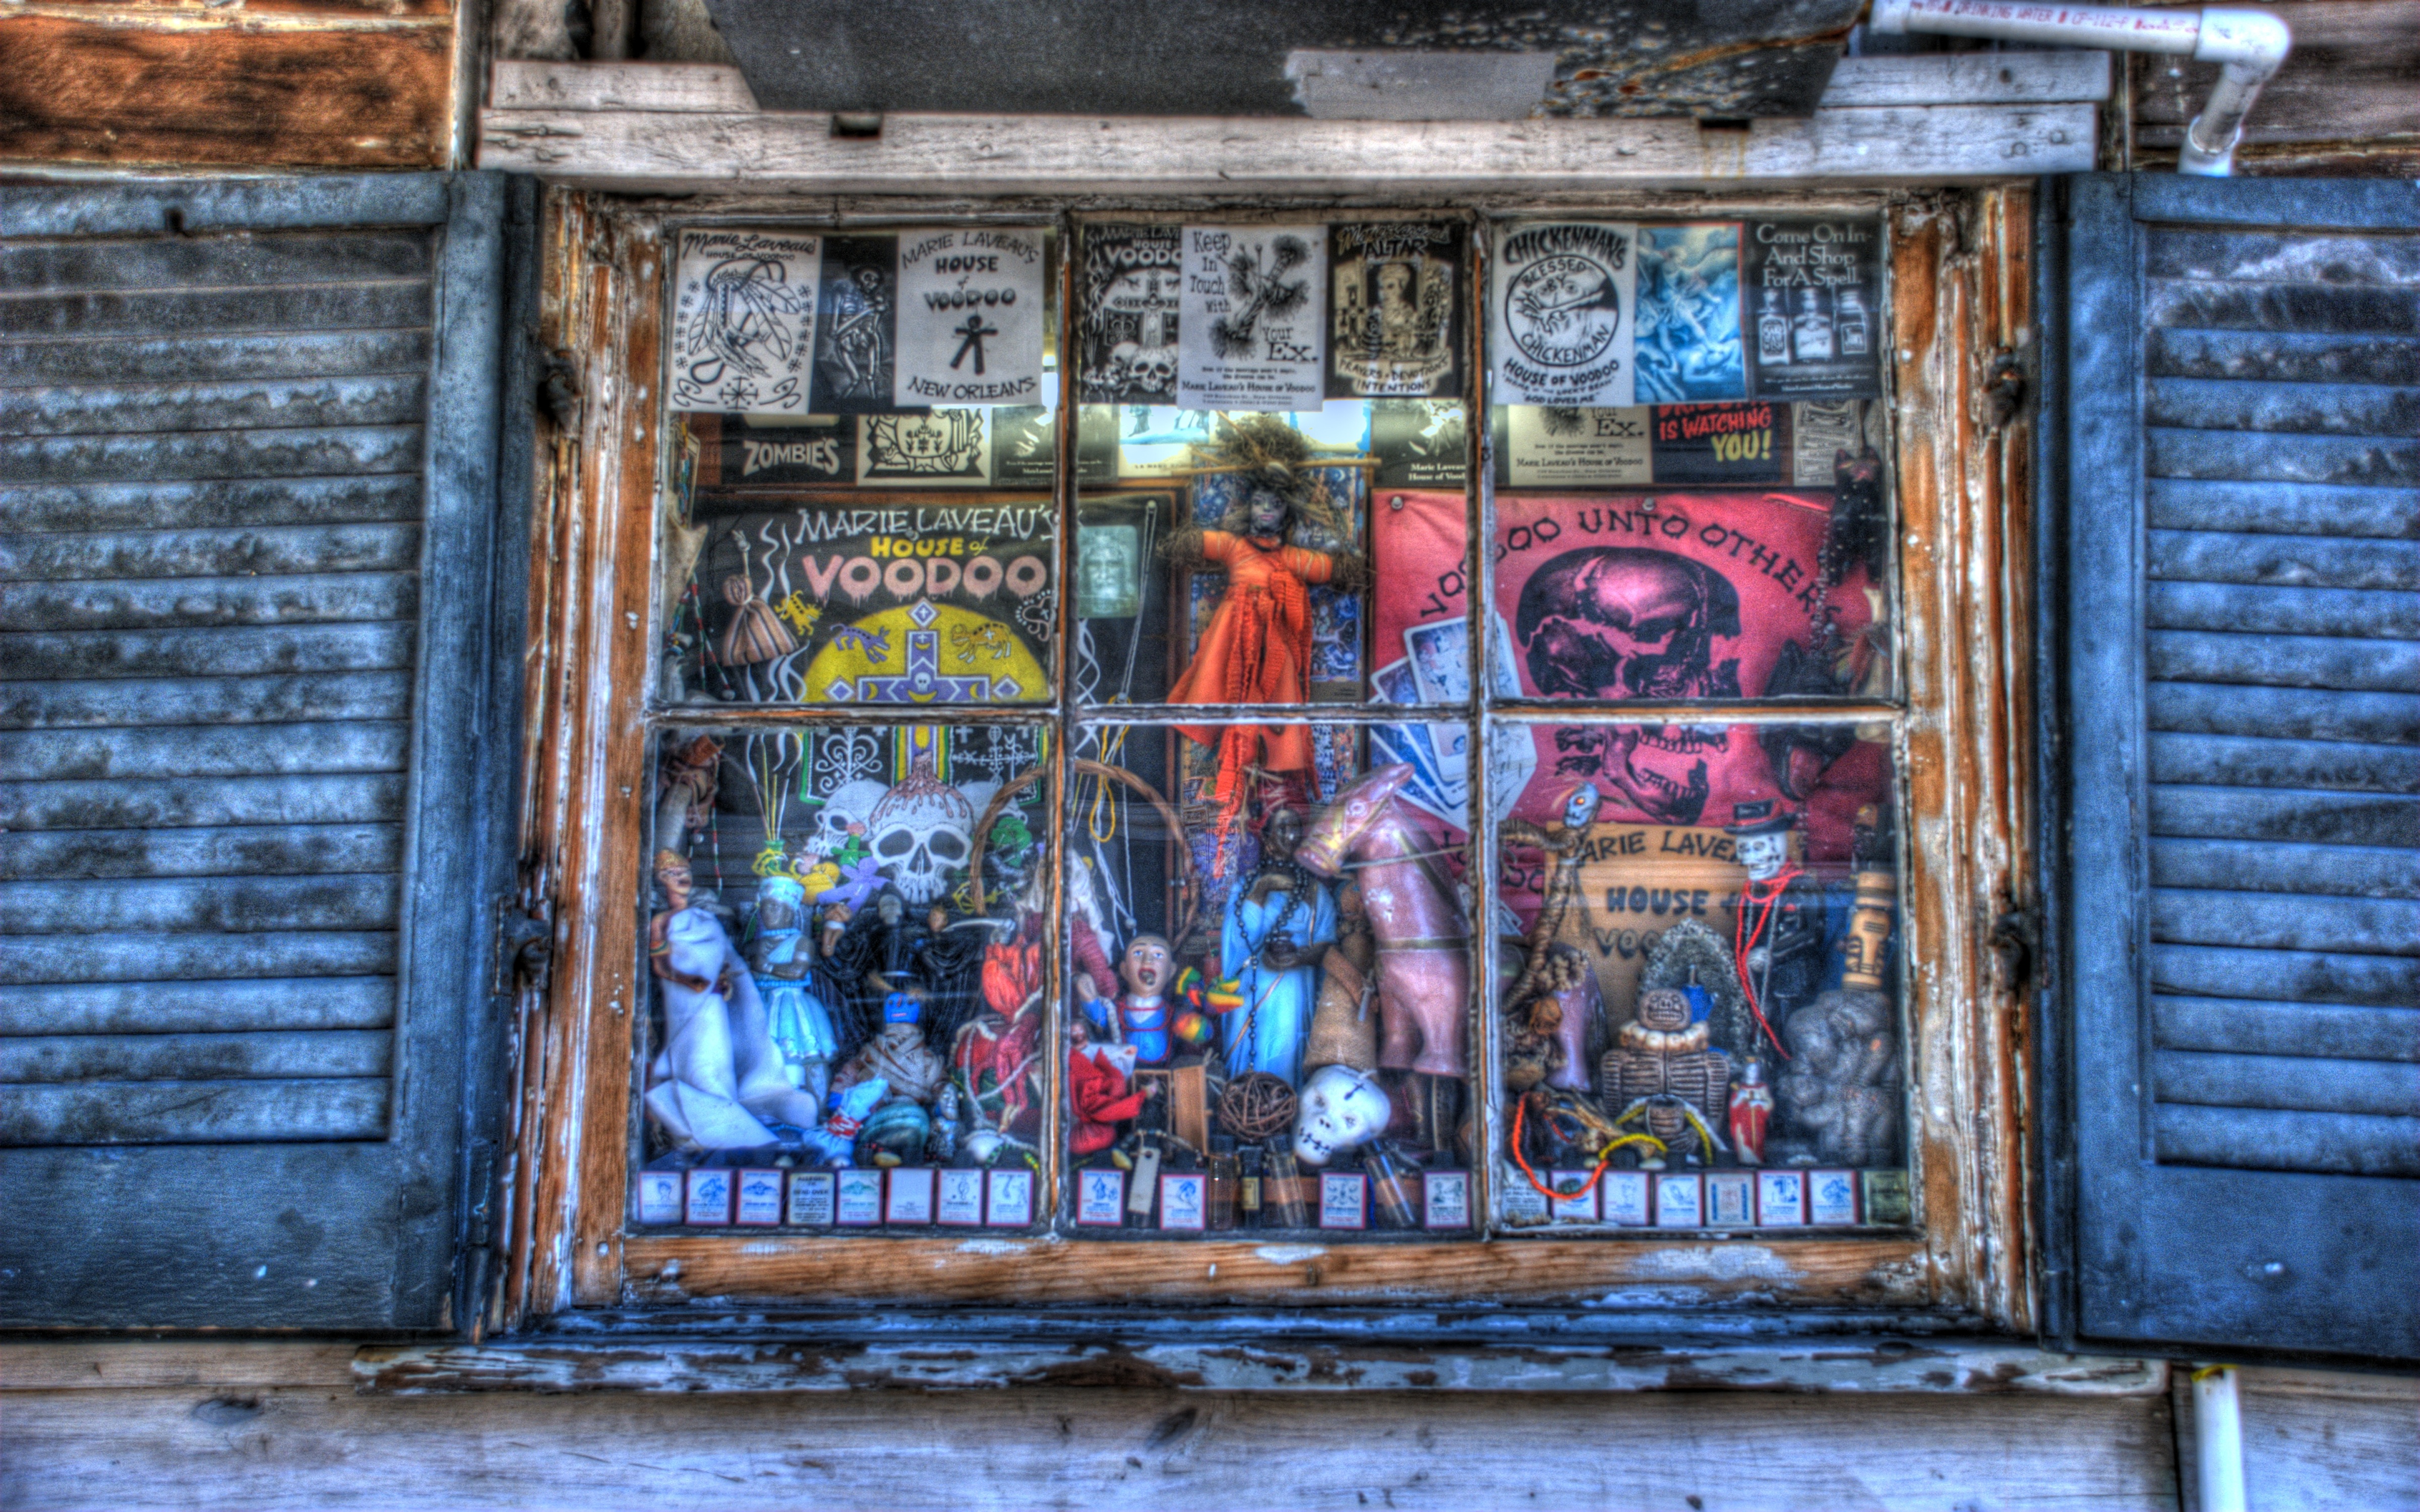 New Orleans voodoo shop window with HDR building and store features.